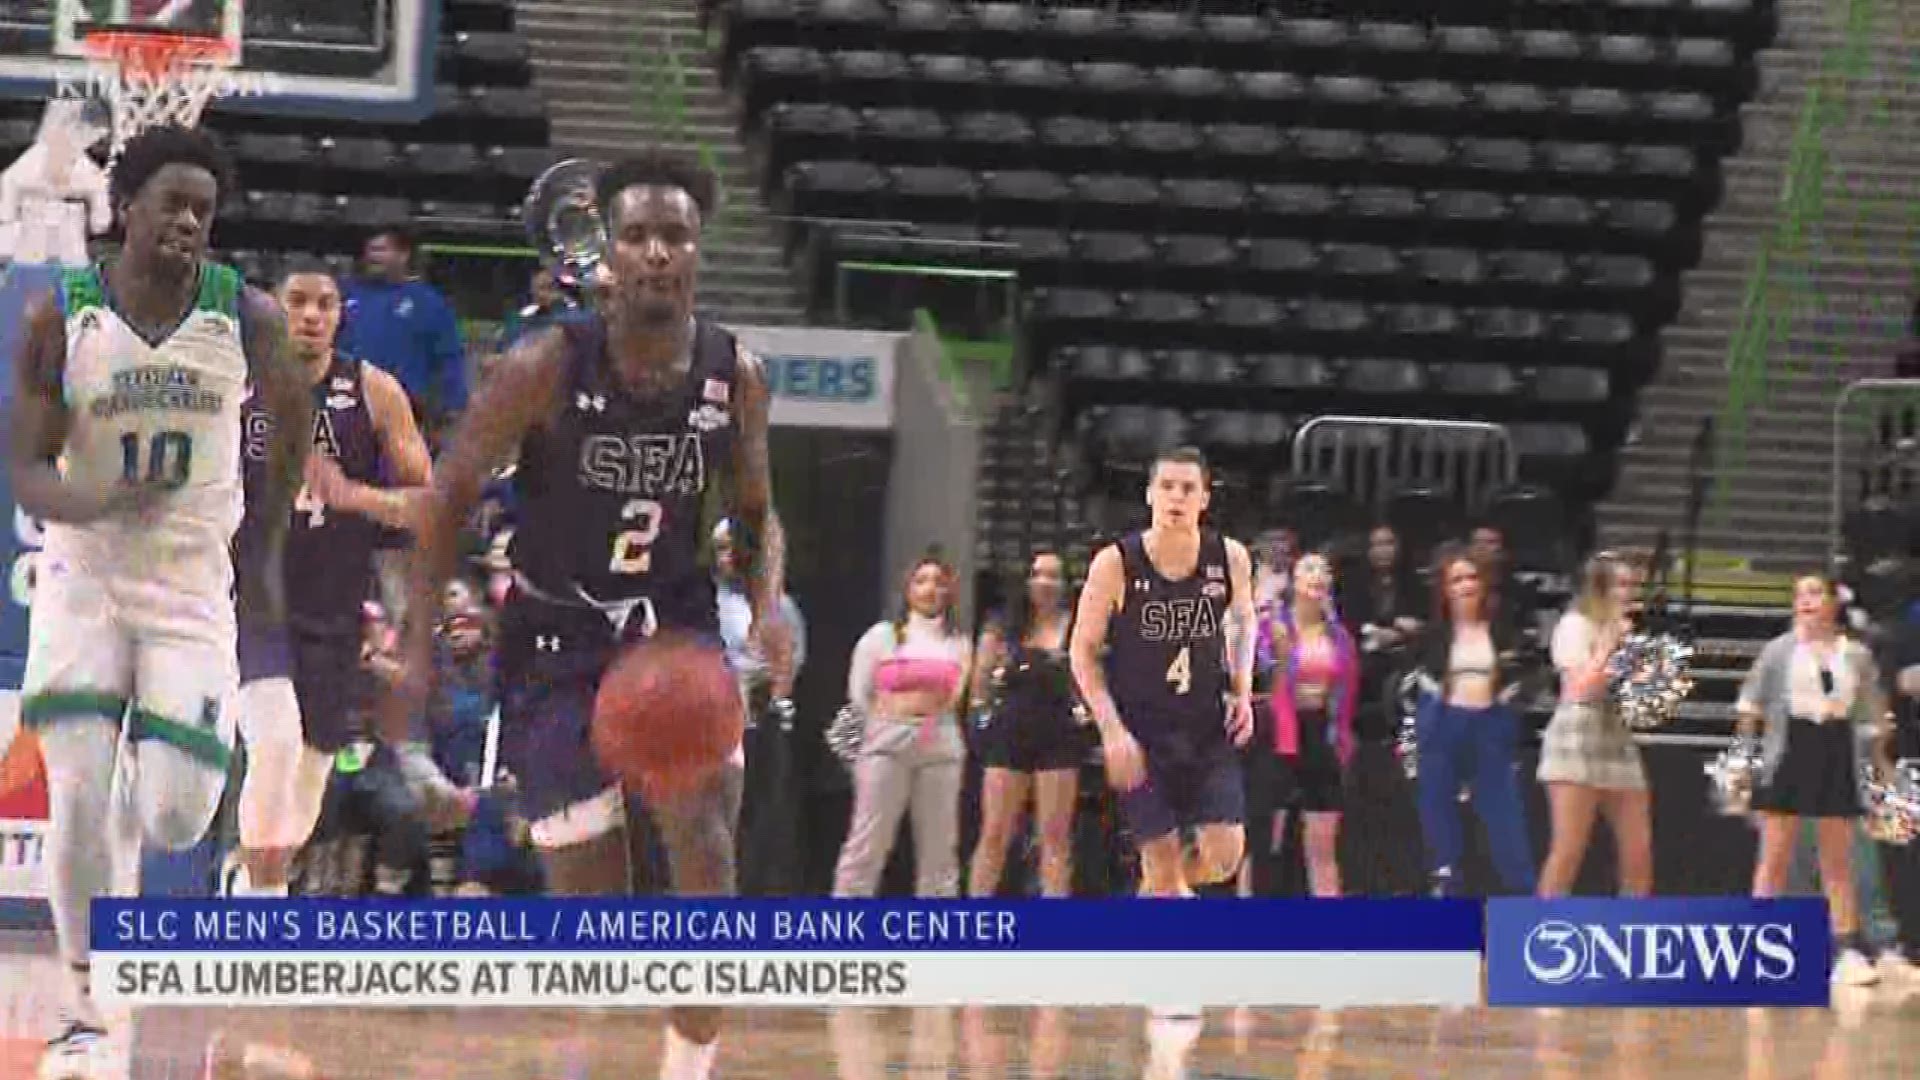 Texas A&M-Corpus Christi basketball was swept by Stephen F. Austin in its double-header. The men falling 75-67 and the women falling 72-49.